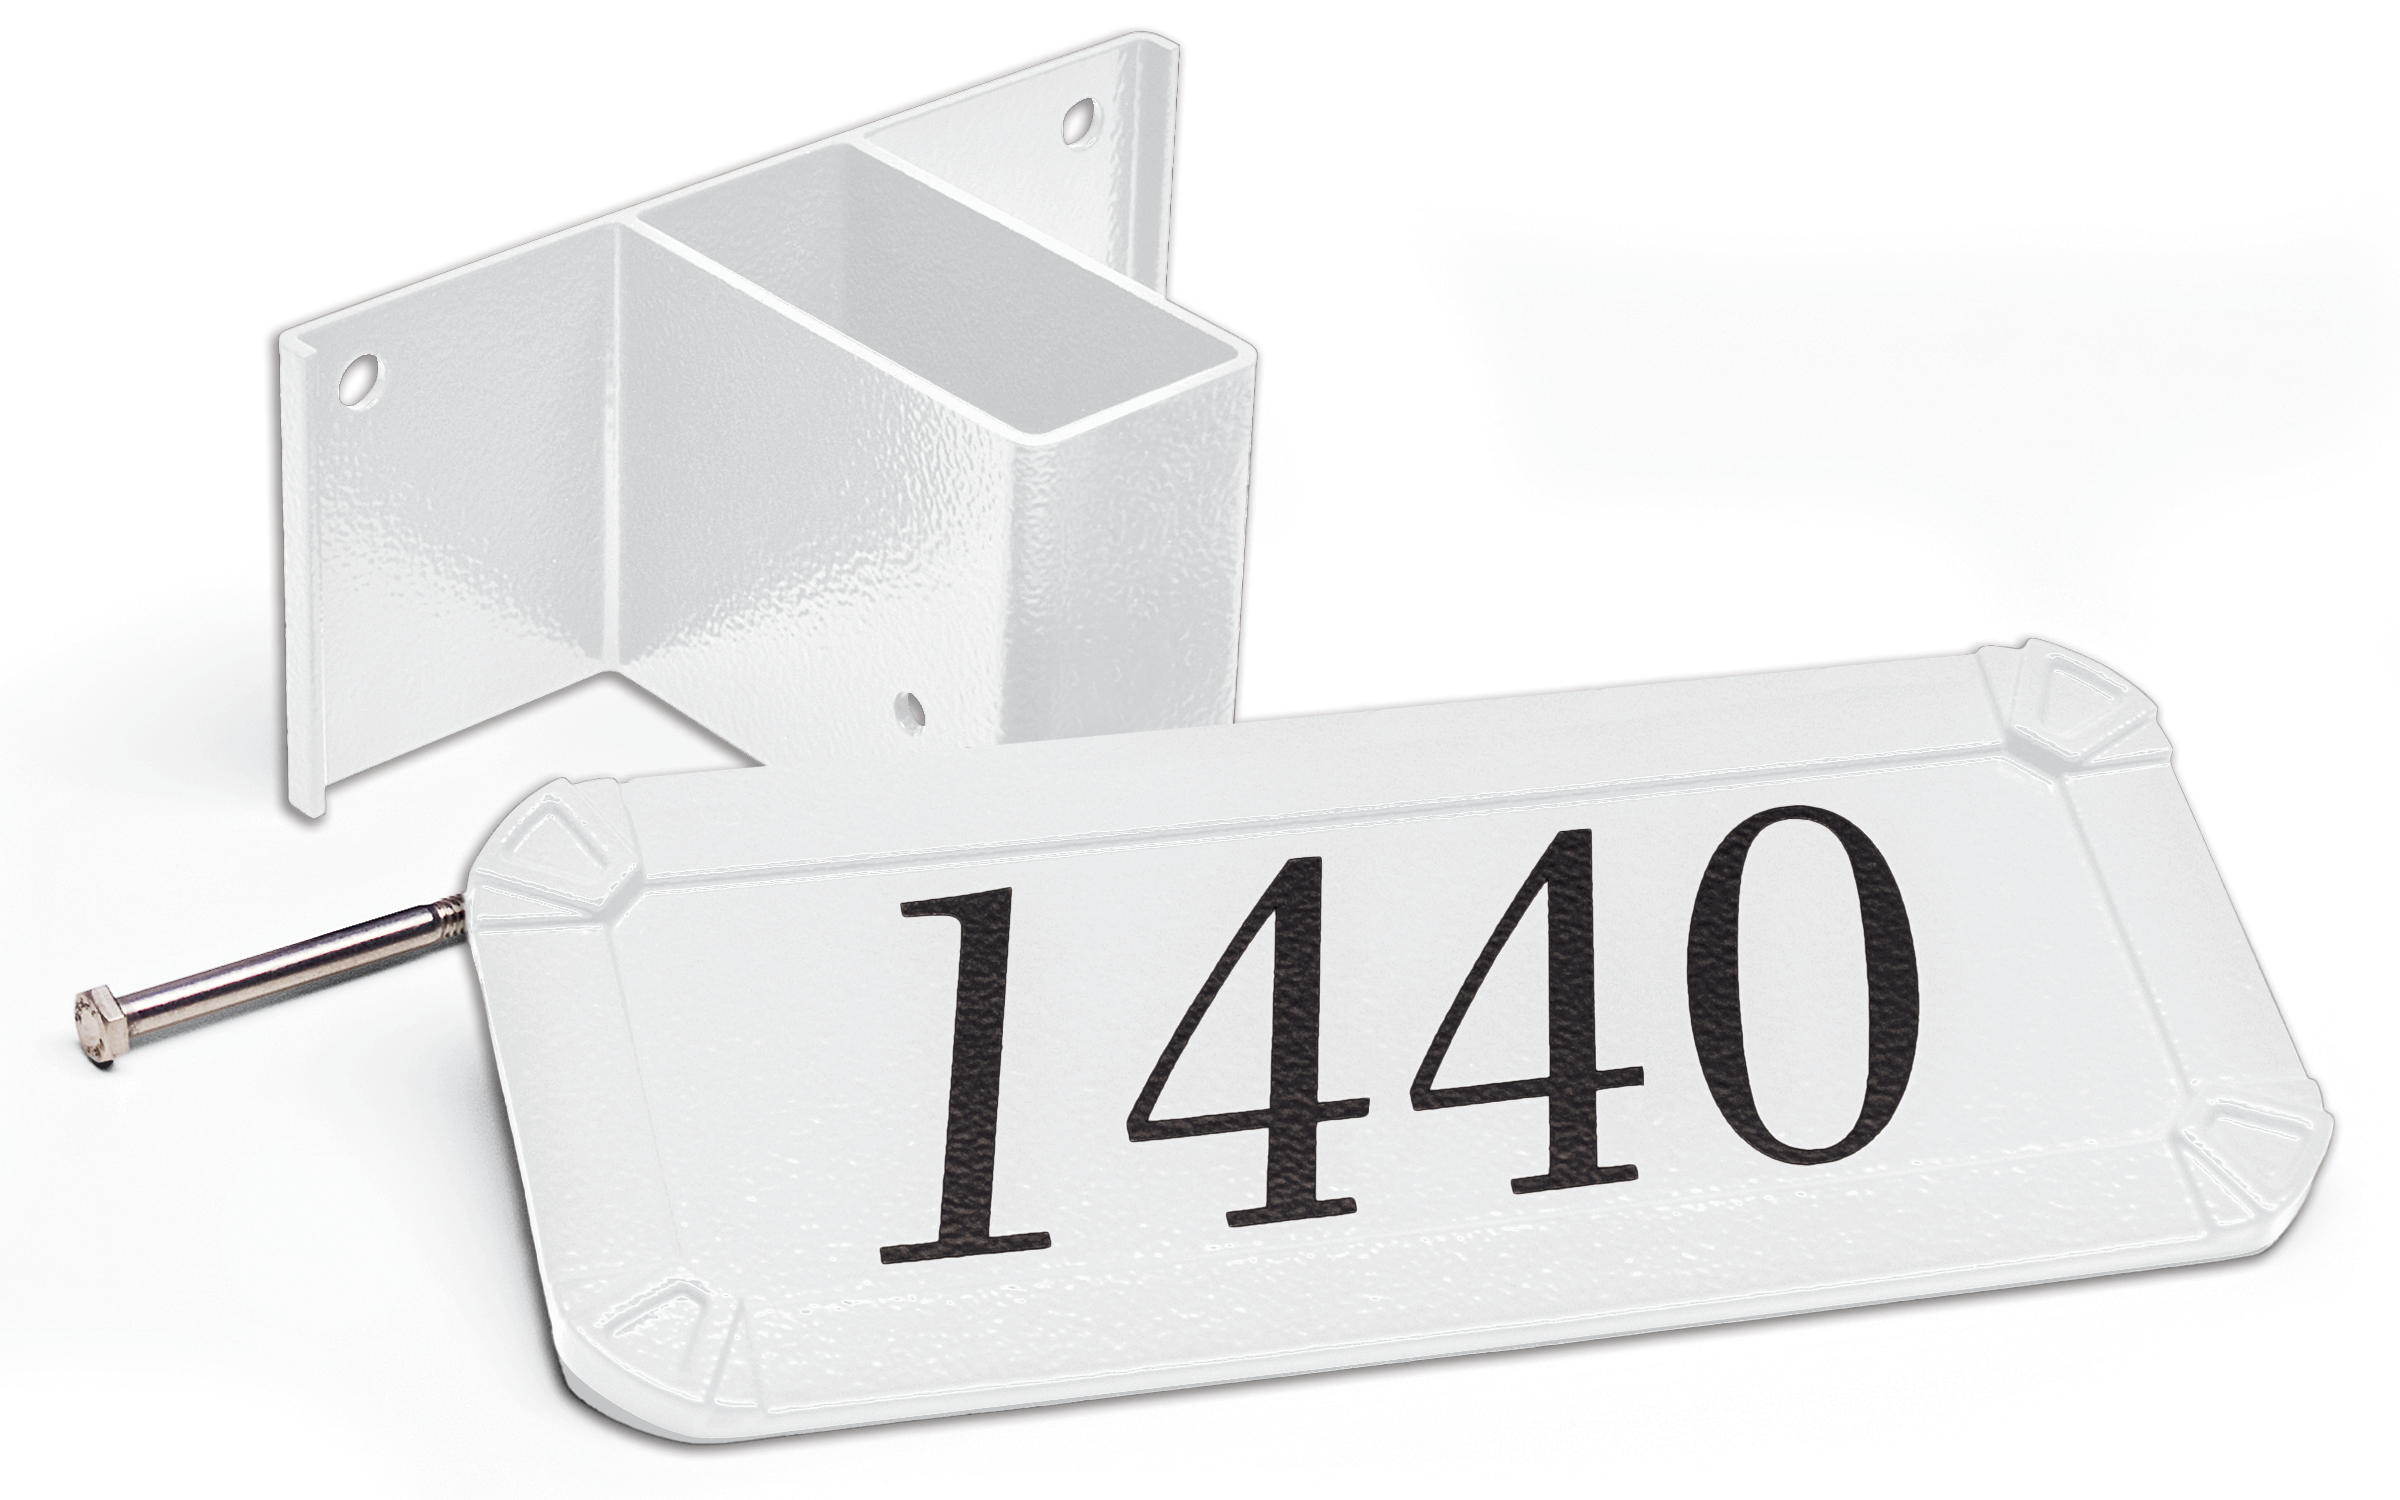 Black and White Limited Edition Keystone Standard Address Plaque